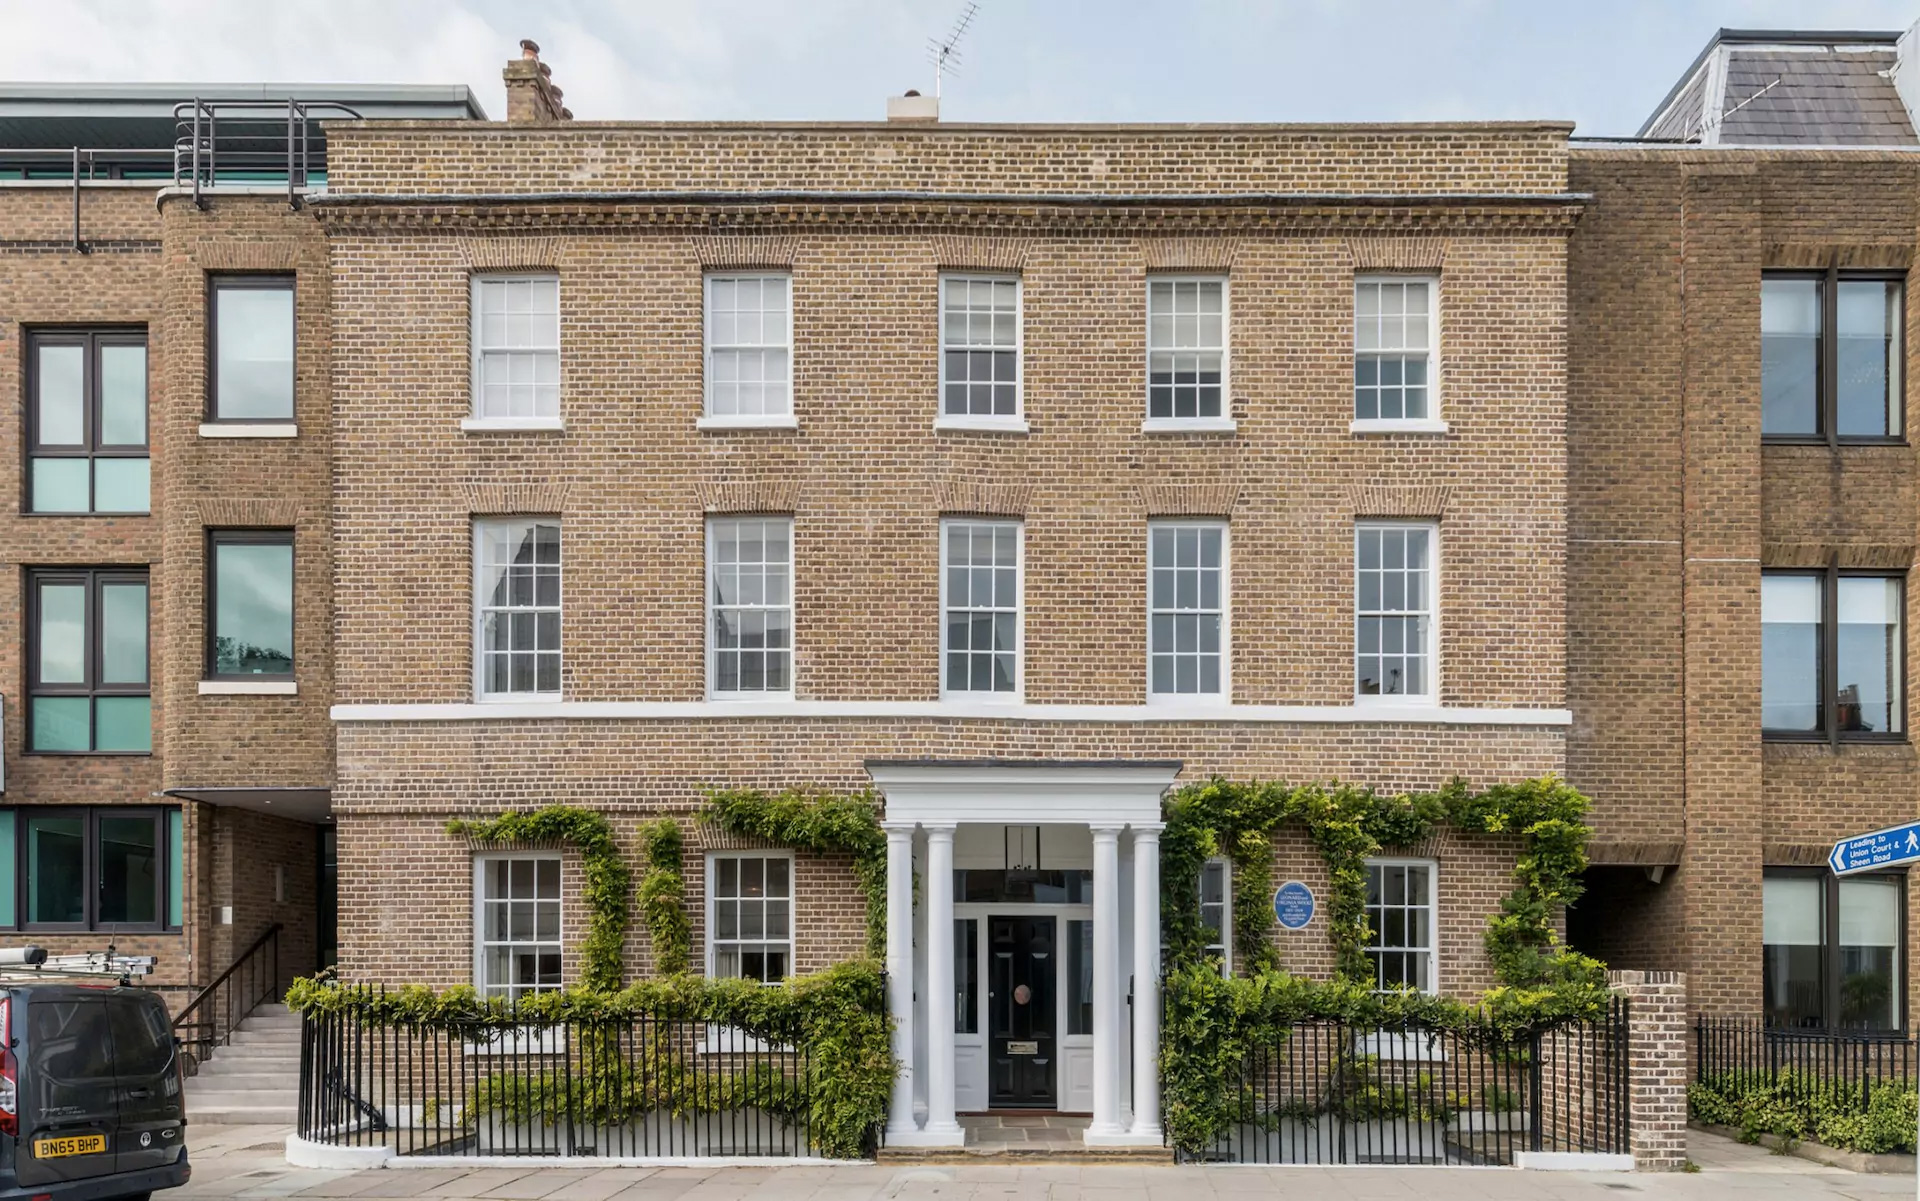 Virginia and Leonard Woolf's former home Hogarth House is for sale